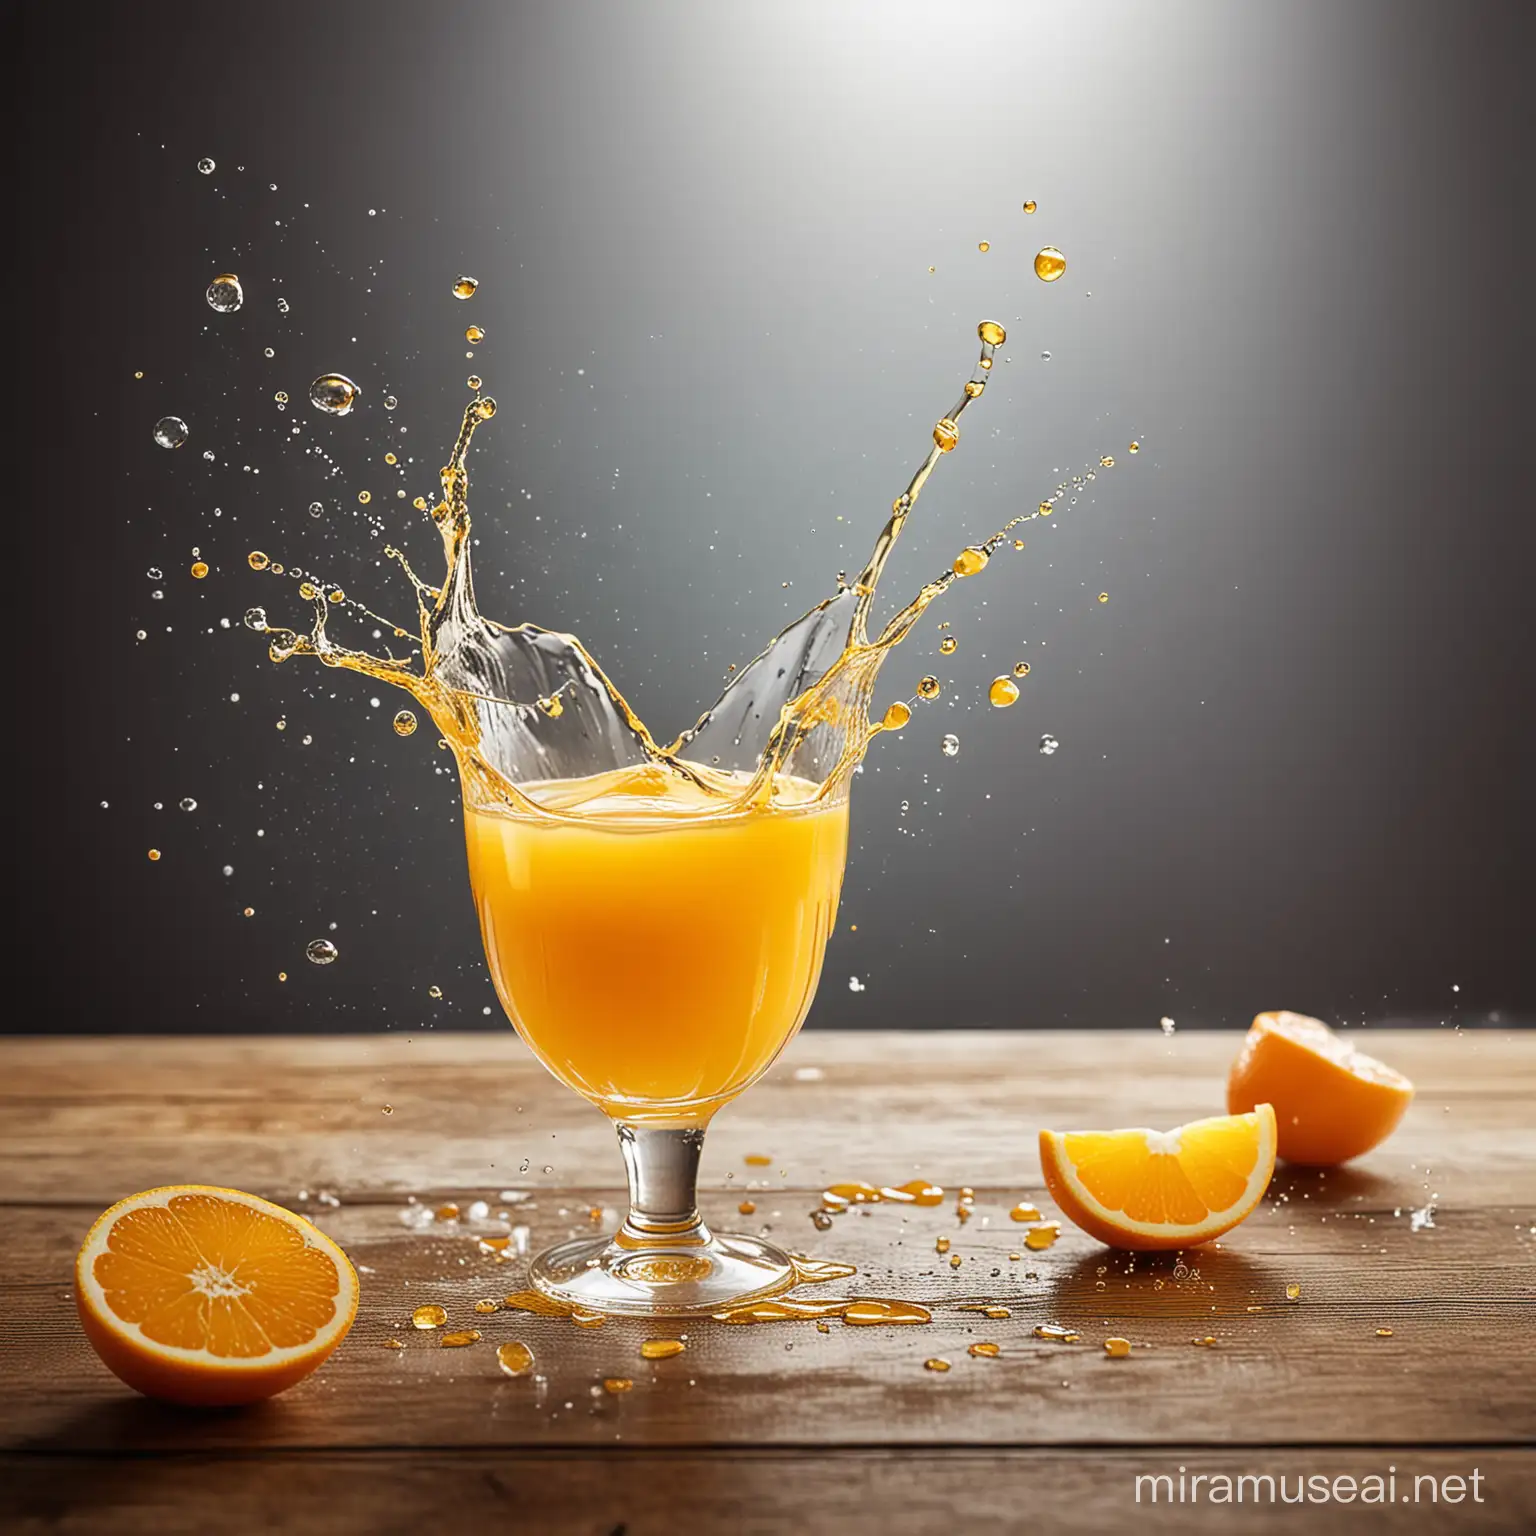 food photography, advertising, [glass]on a table, [orange juice floating], a splash of [orange], photo manipulation, place for text, highly detailed photos with selective soft focus.
